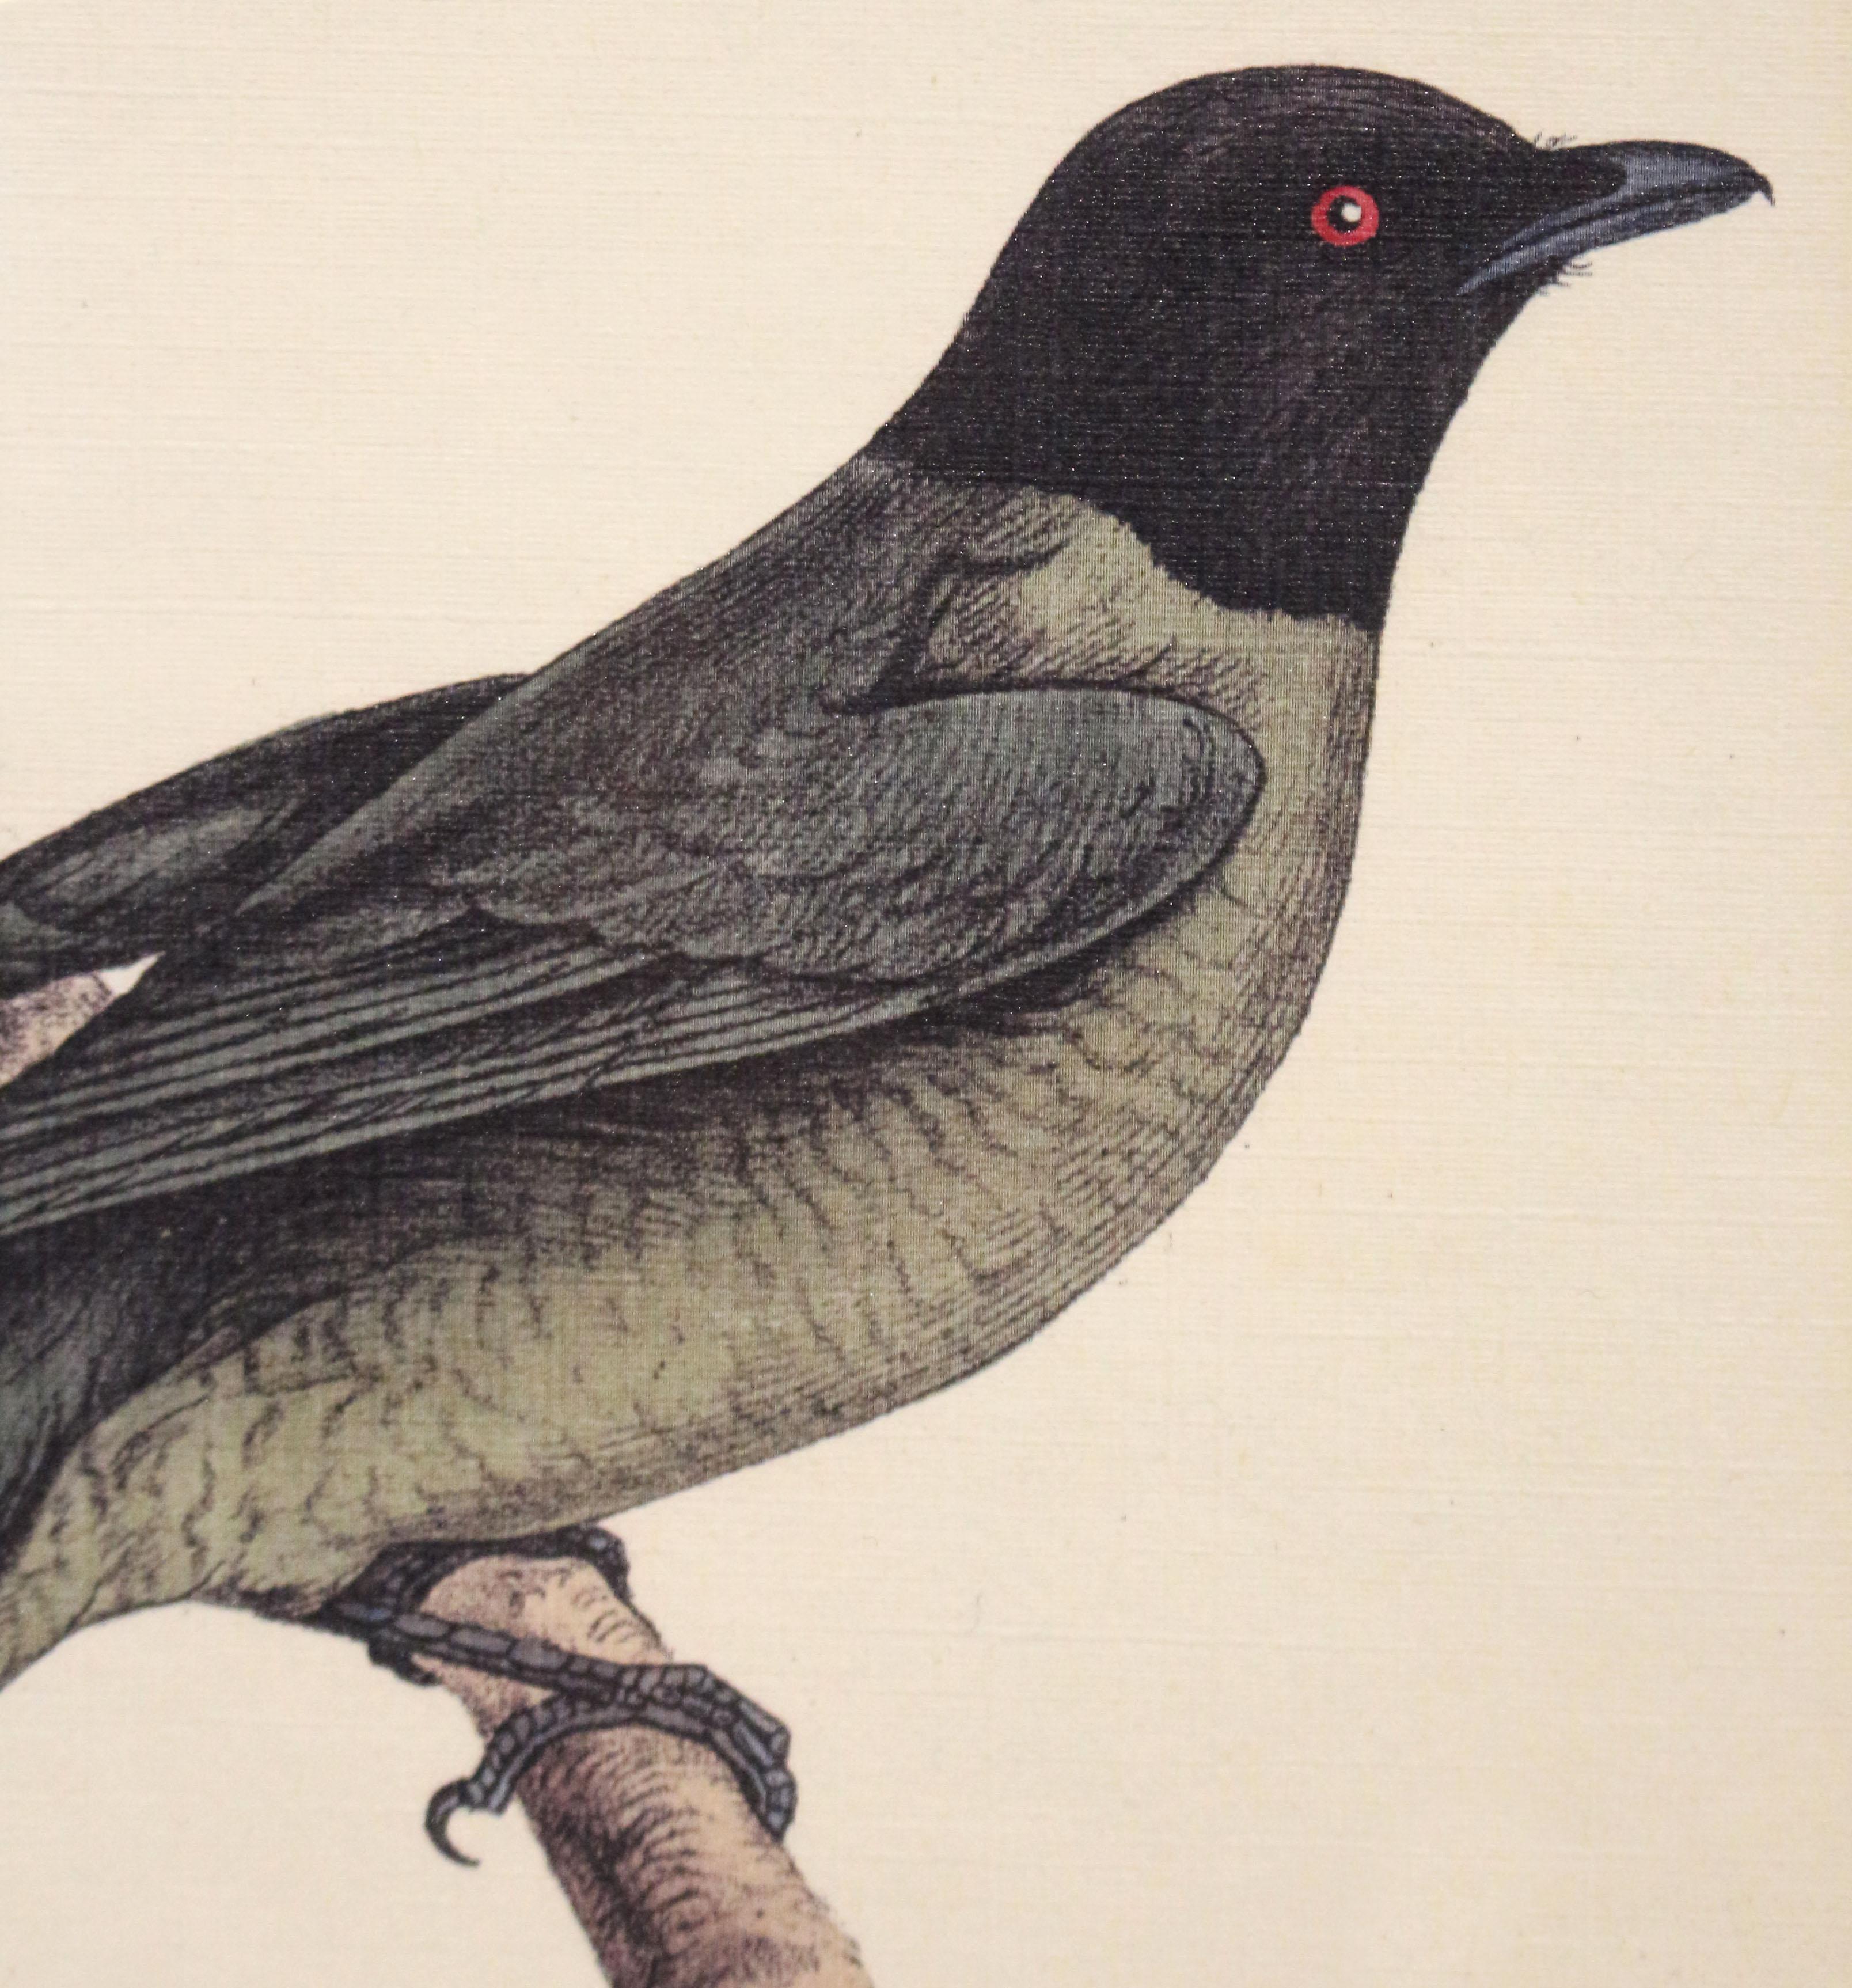 English Early-Mid 20th Century Framed Lithograph Print of a Black Headed Bird